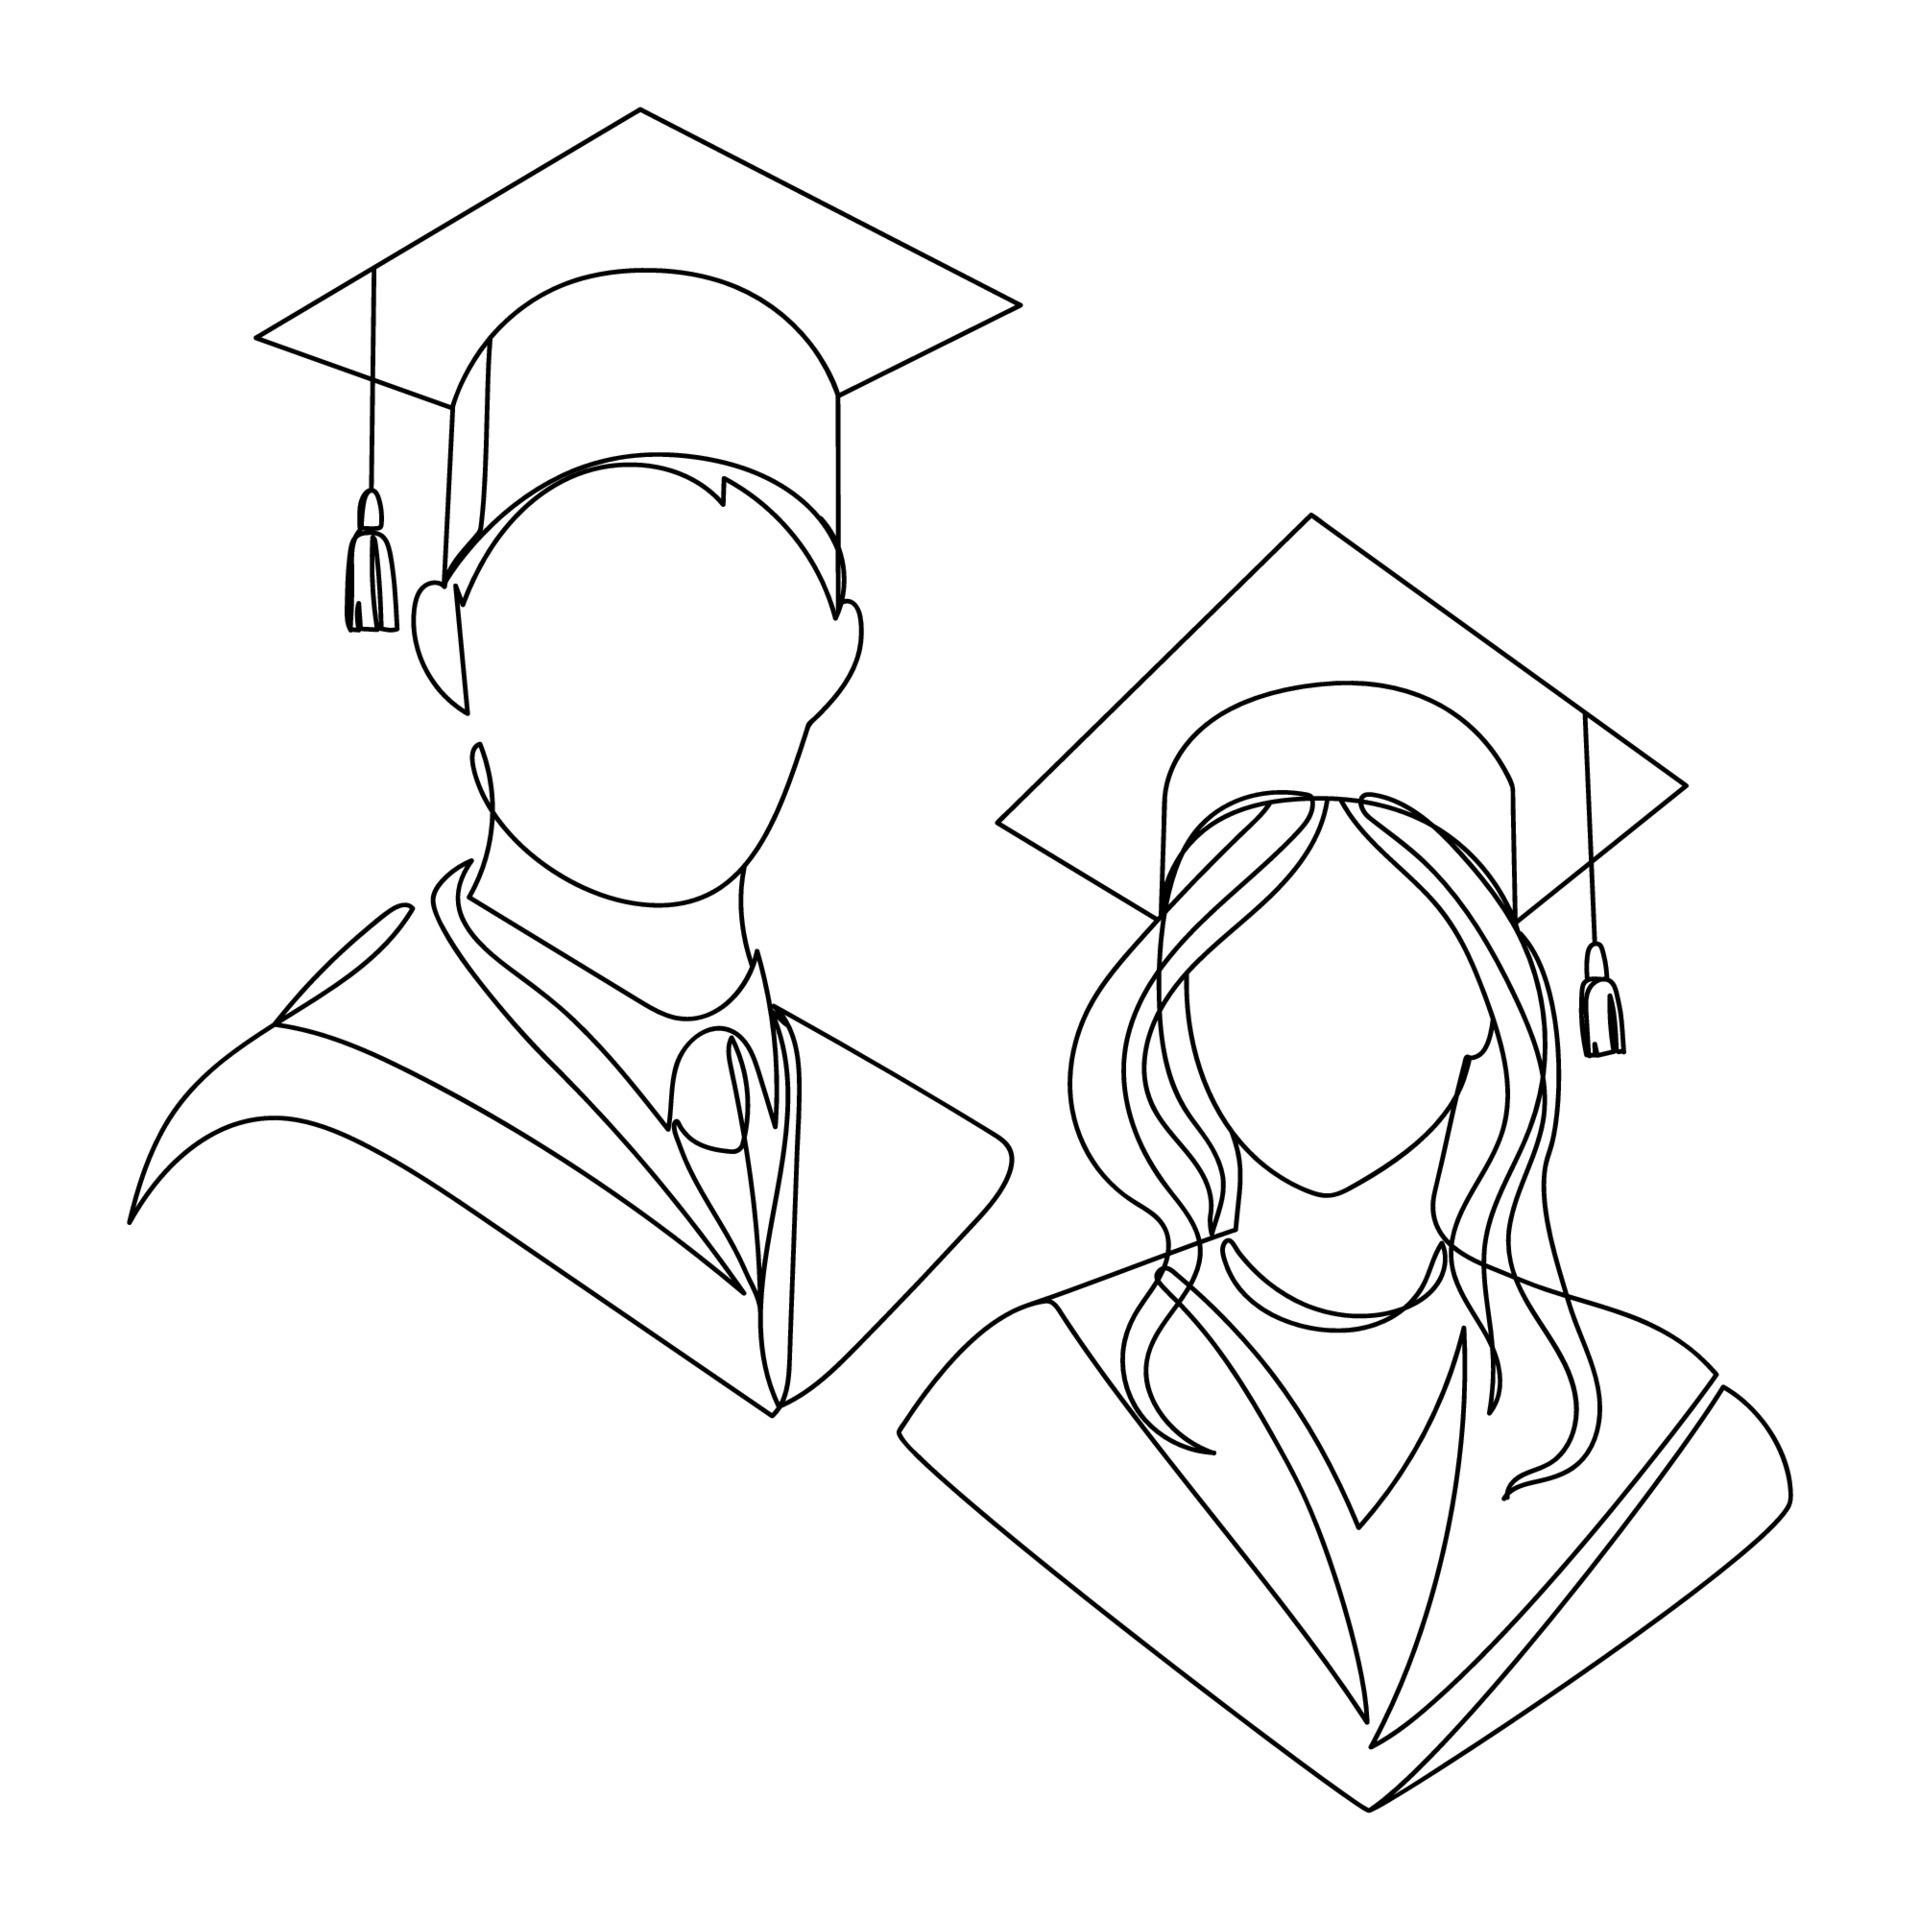 Line art Students graduates in square academic caps sketch drawing